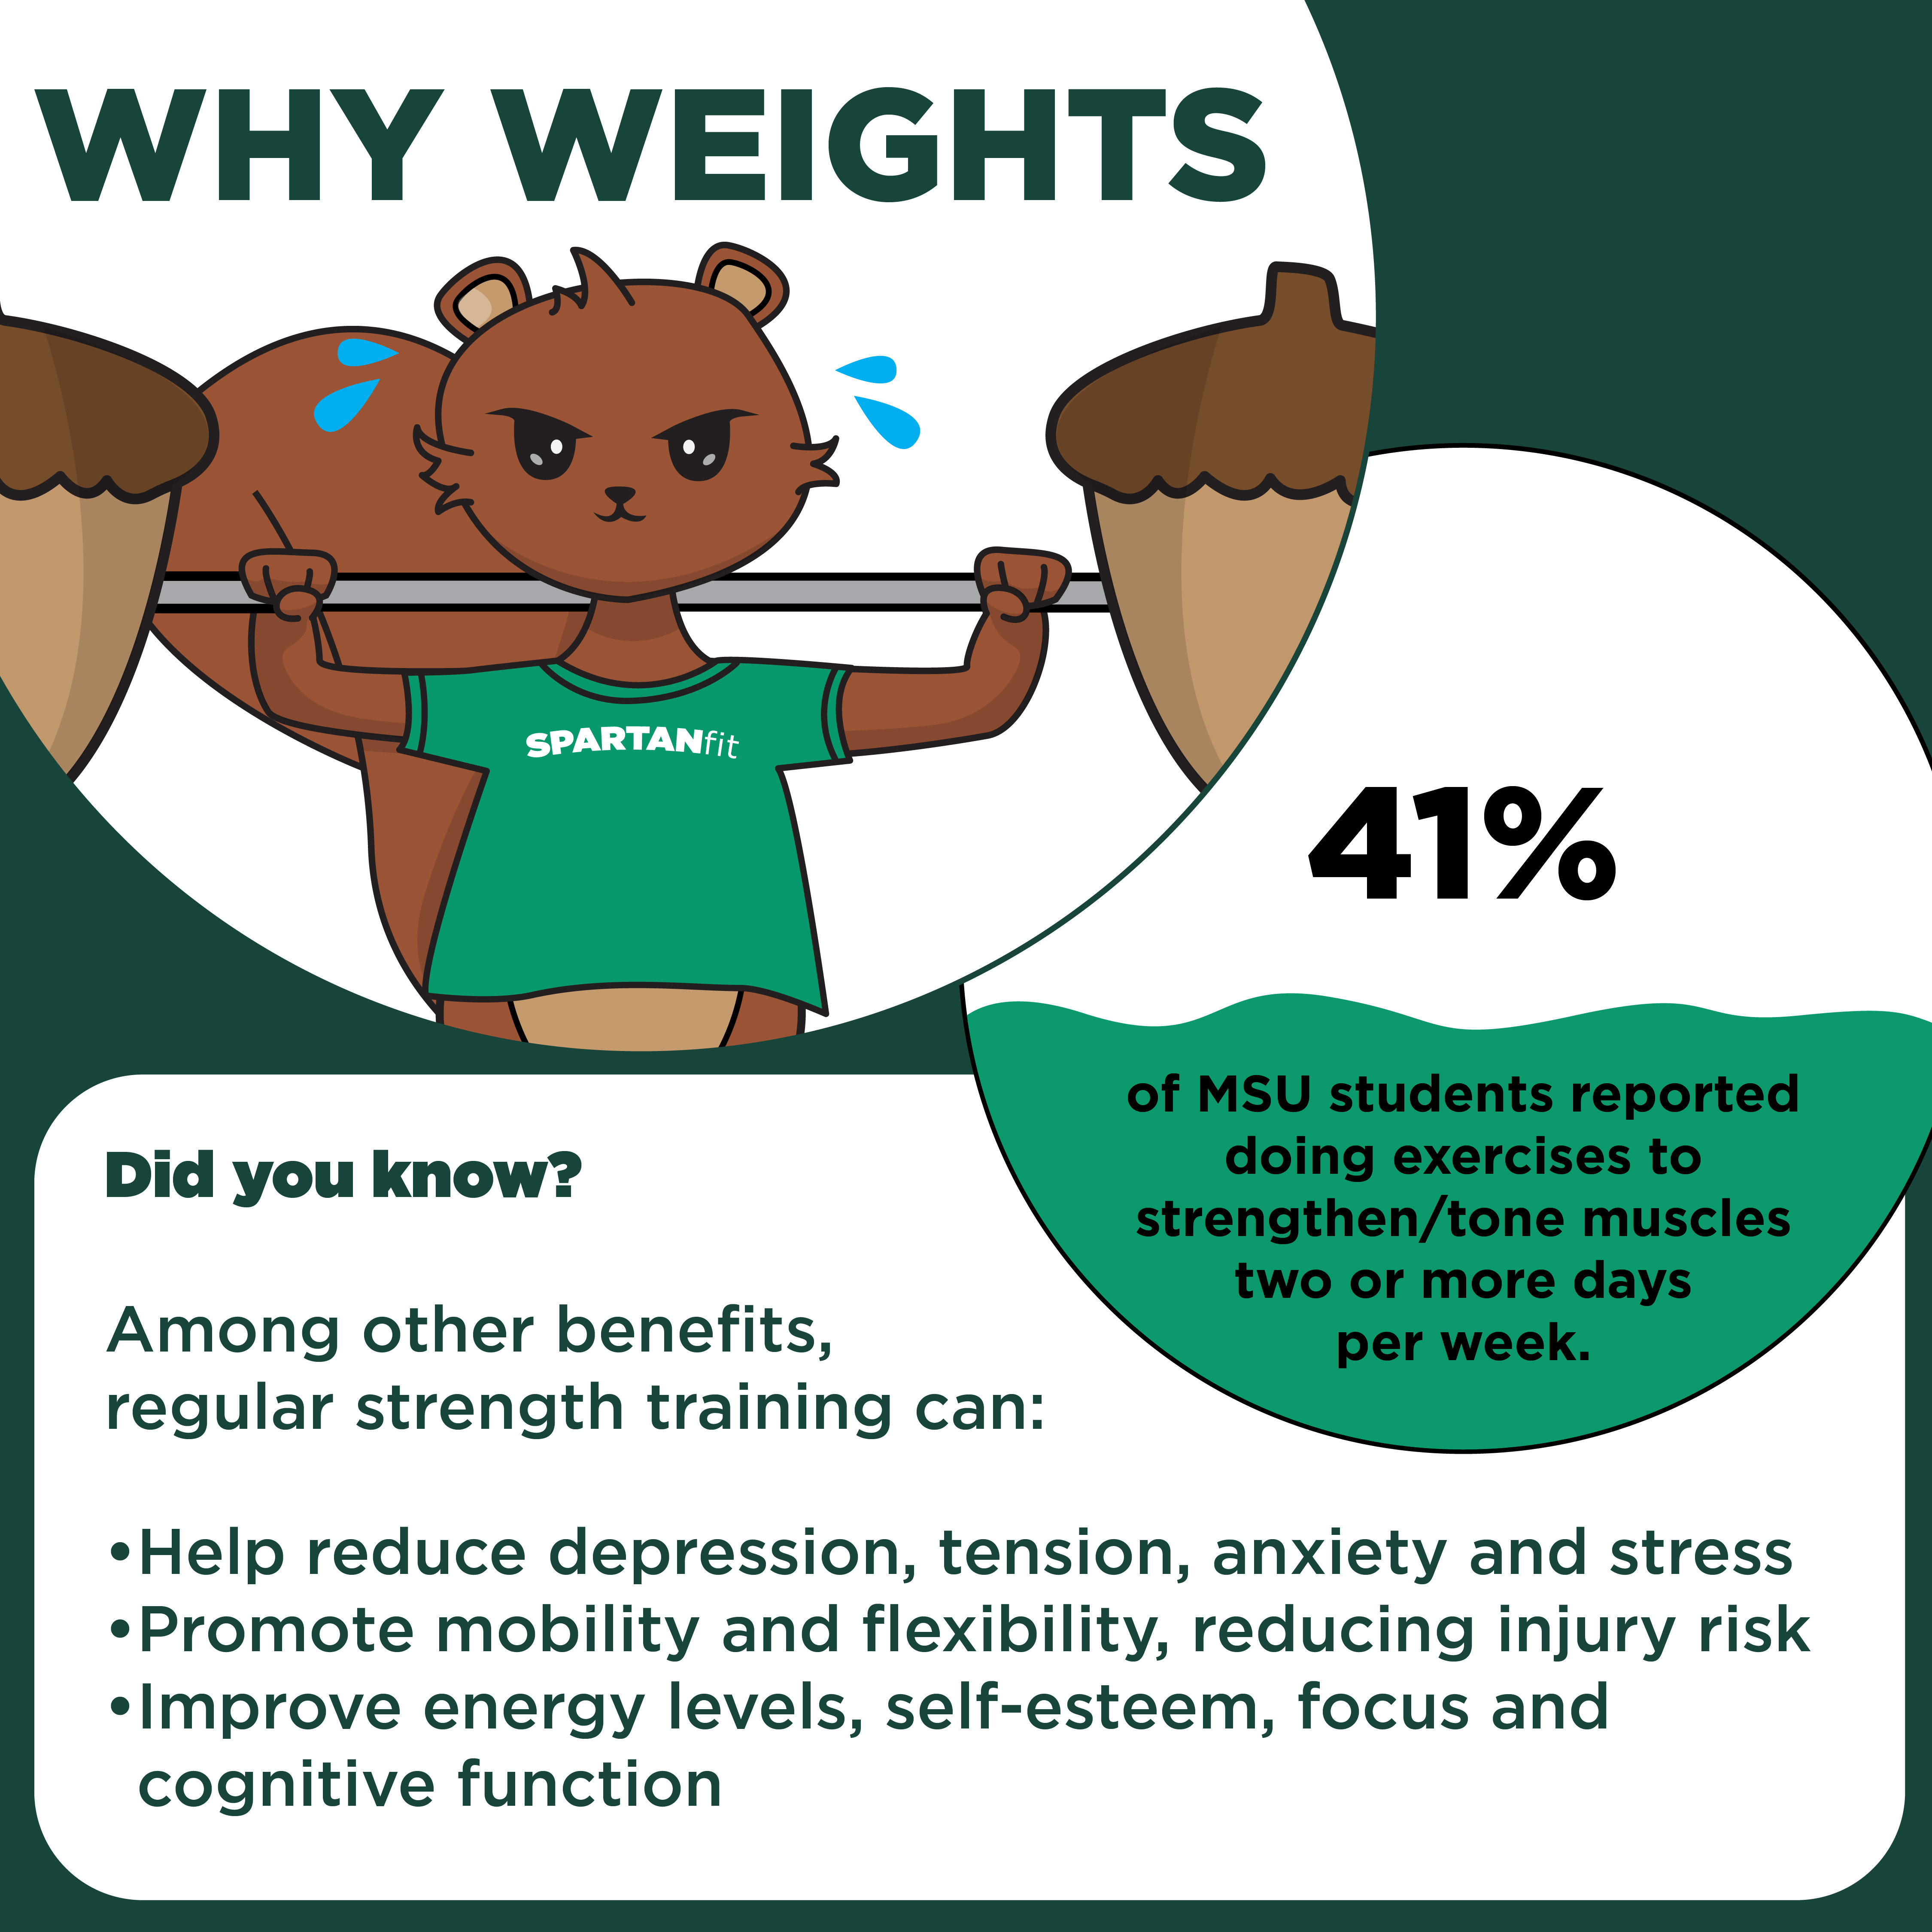 An illustrated squirrel lifts a bar weight, with acorns as the weights. The squirrel is sweating and wearing a SpartanFit T-shirt. Text reads, "Why Weights. 41% of MSU students reported doing exercises to strengthen or tone muscles two or more days per week. Did you know? Among other benefits, regular strength training can: Help reduce depression, tension, anxiety and stress; promote flexibility, reducing injury risk; and improve energy levels, self-esteem, focus and cognitive function."